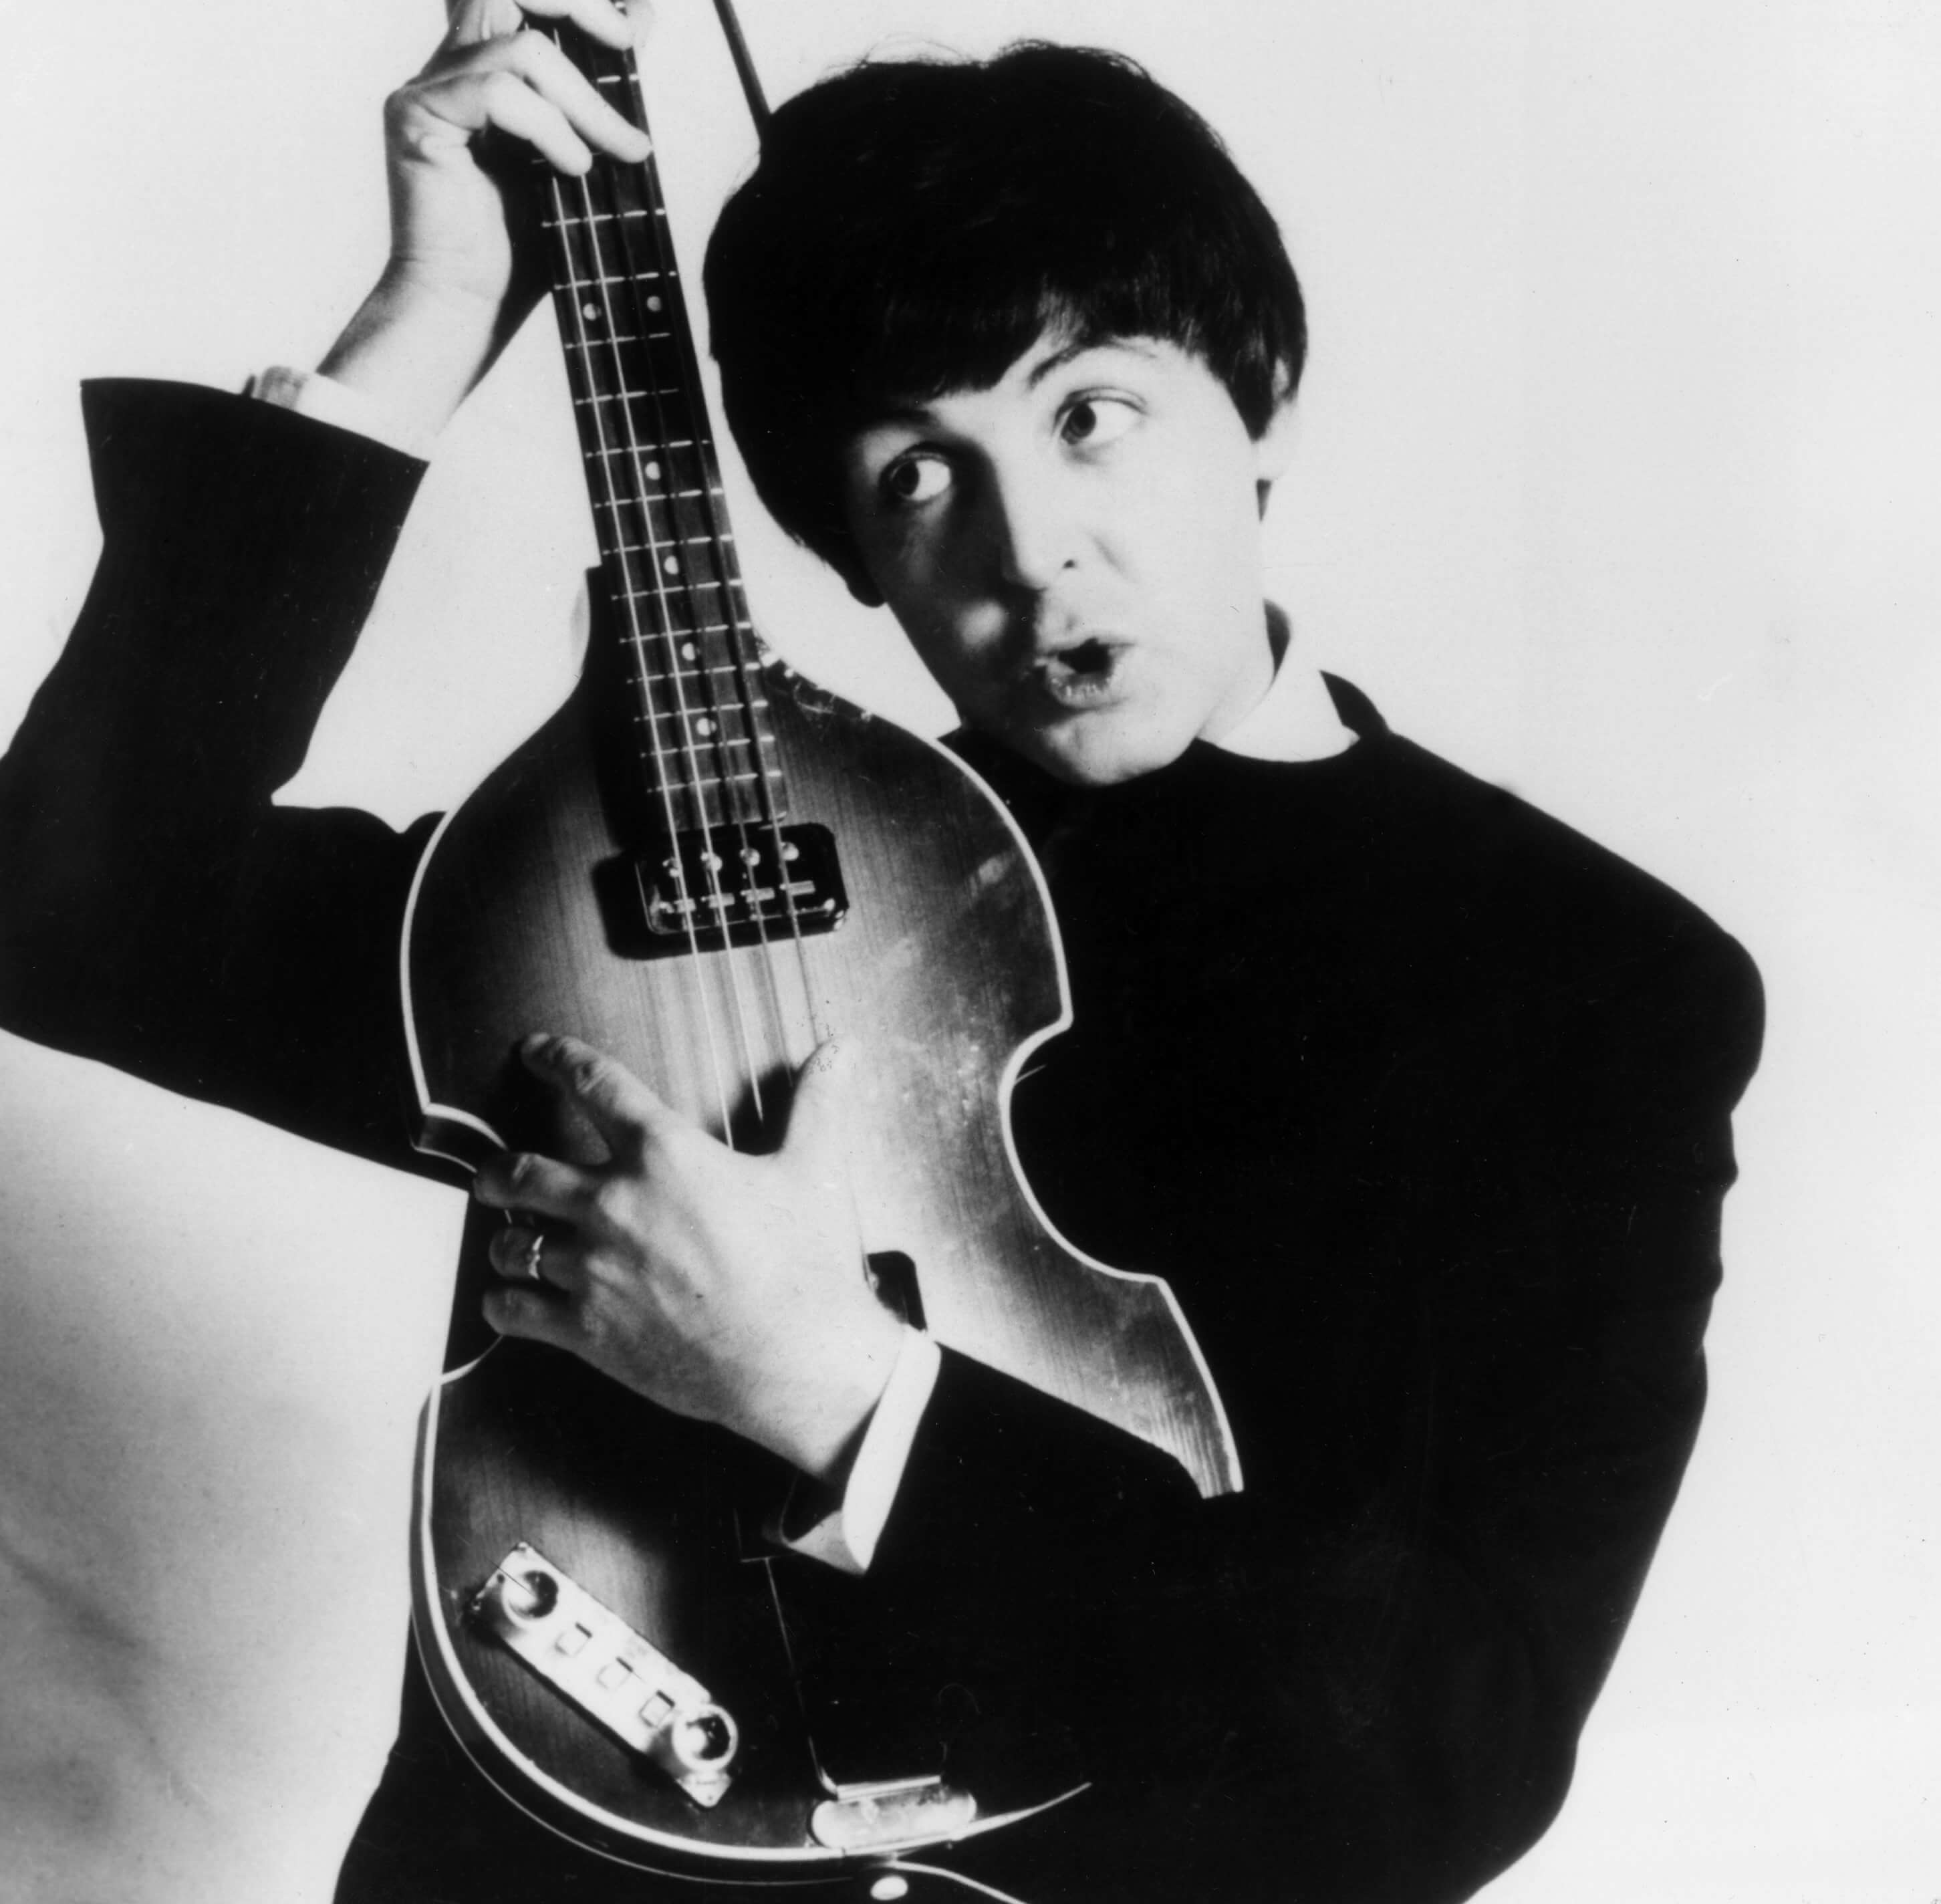 Paul McCartney with a guitar during The Beatles' "Here, There and Everywhere" era